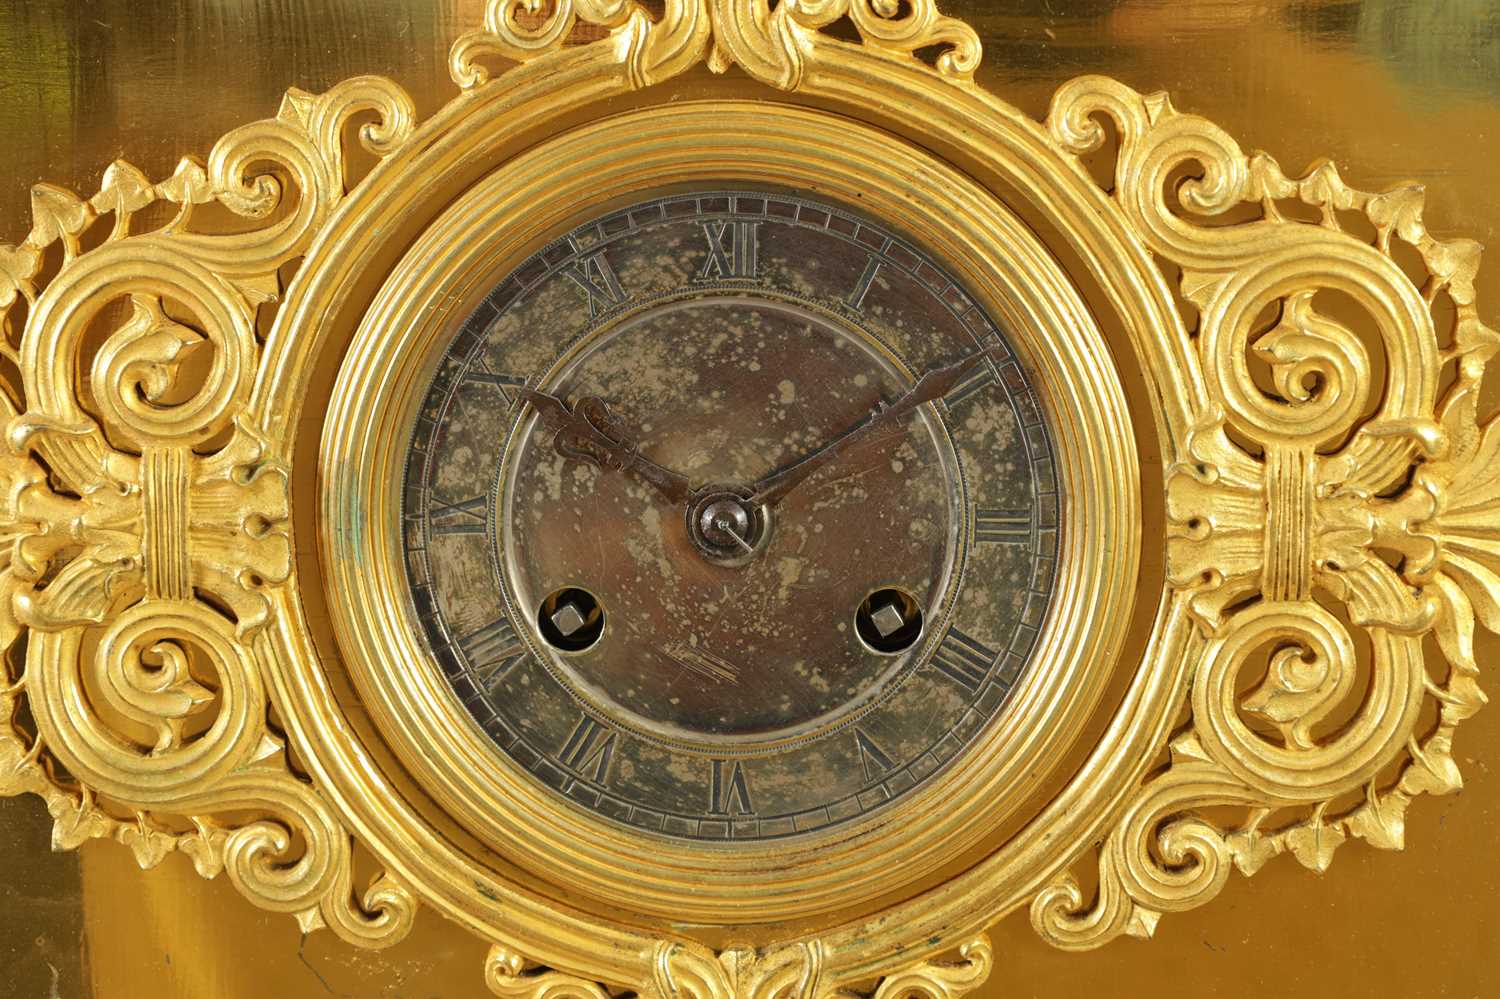 A RARE EARLY 19TH CENTURY FRENCH BRONZE AND ORMOLU AUTOMATION MANTEL CLOCK - Image 2 of 9